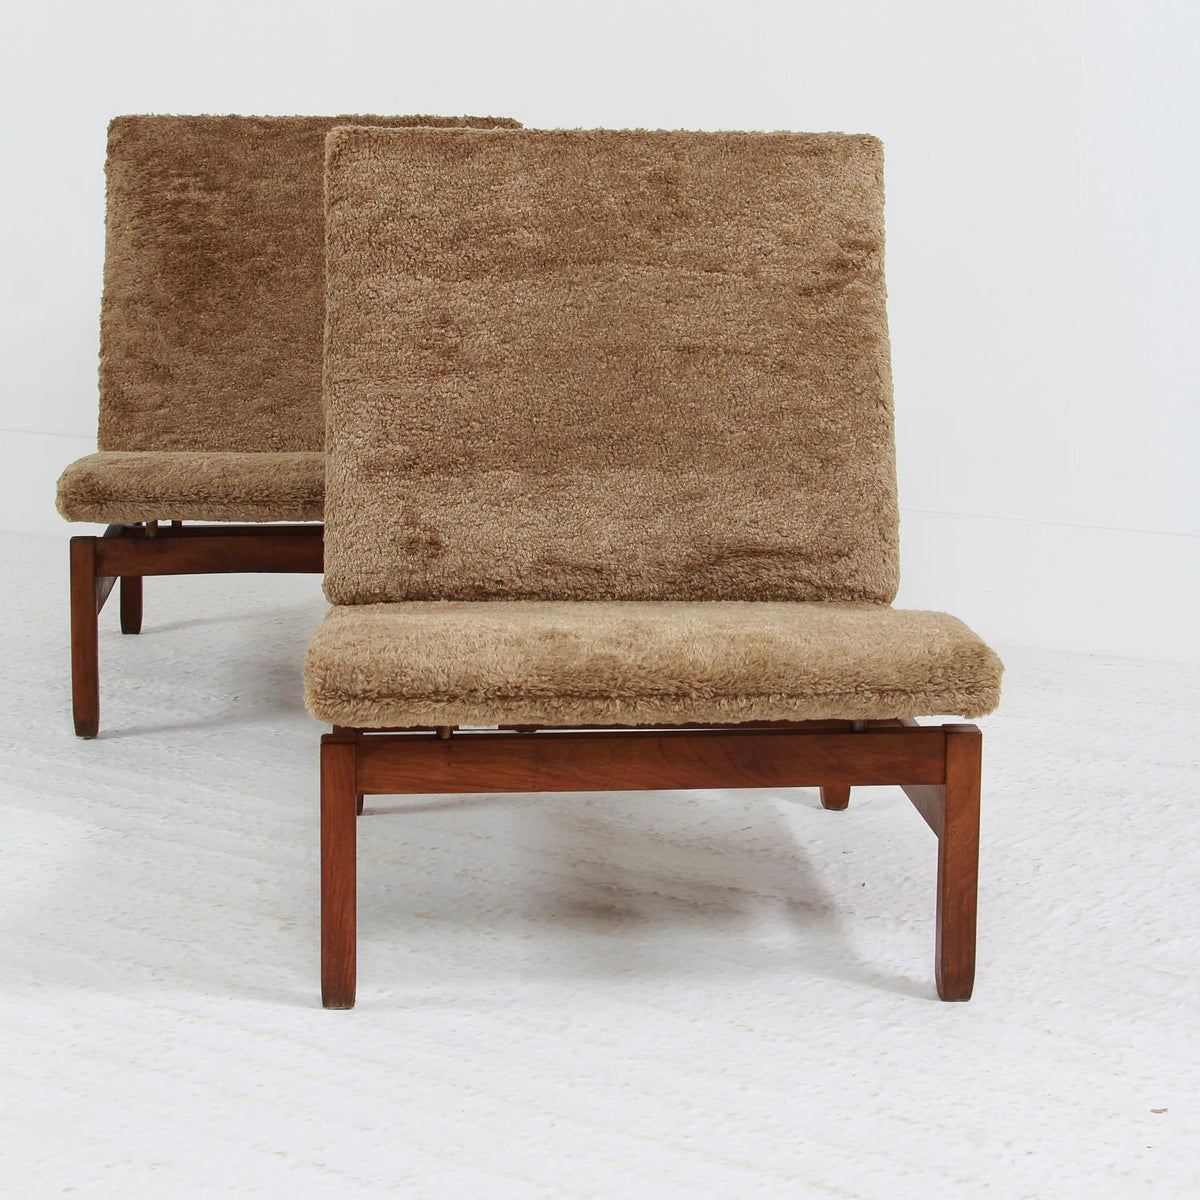 Pair of Mid-Century Modern Spanish  Rationalist Lounge Chairs in Bouclé